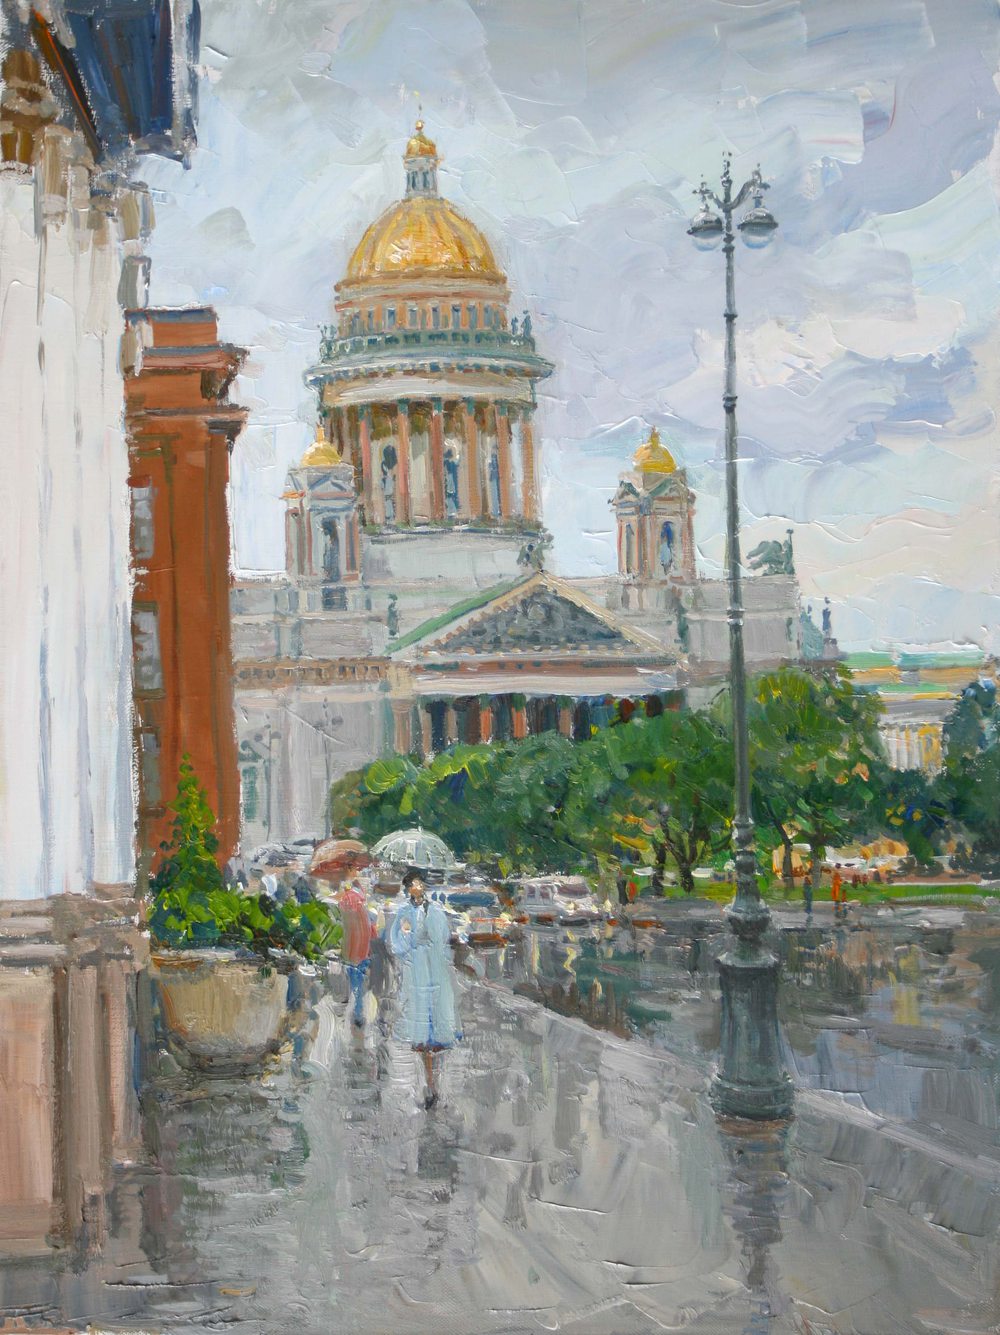 Oil painting on canvas ❀ Isaac's cathedral in the rain